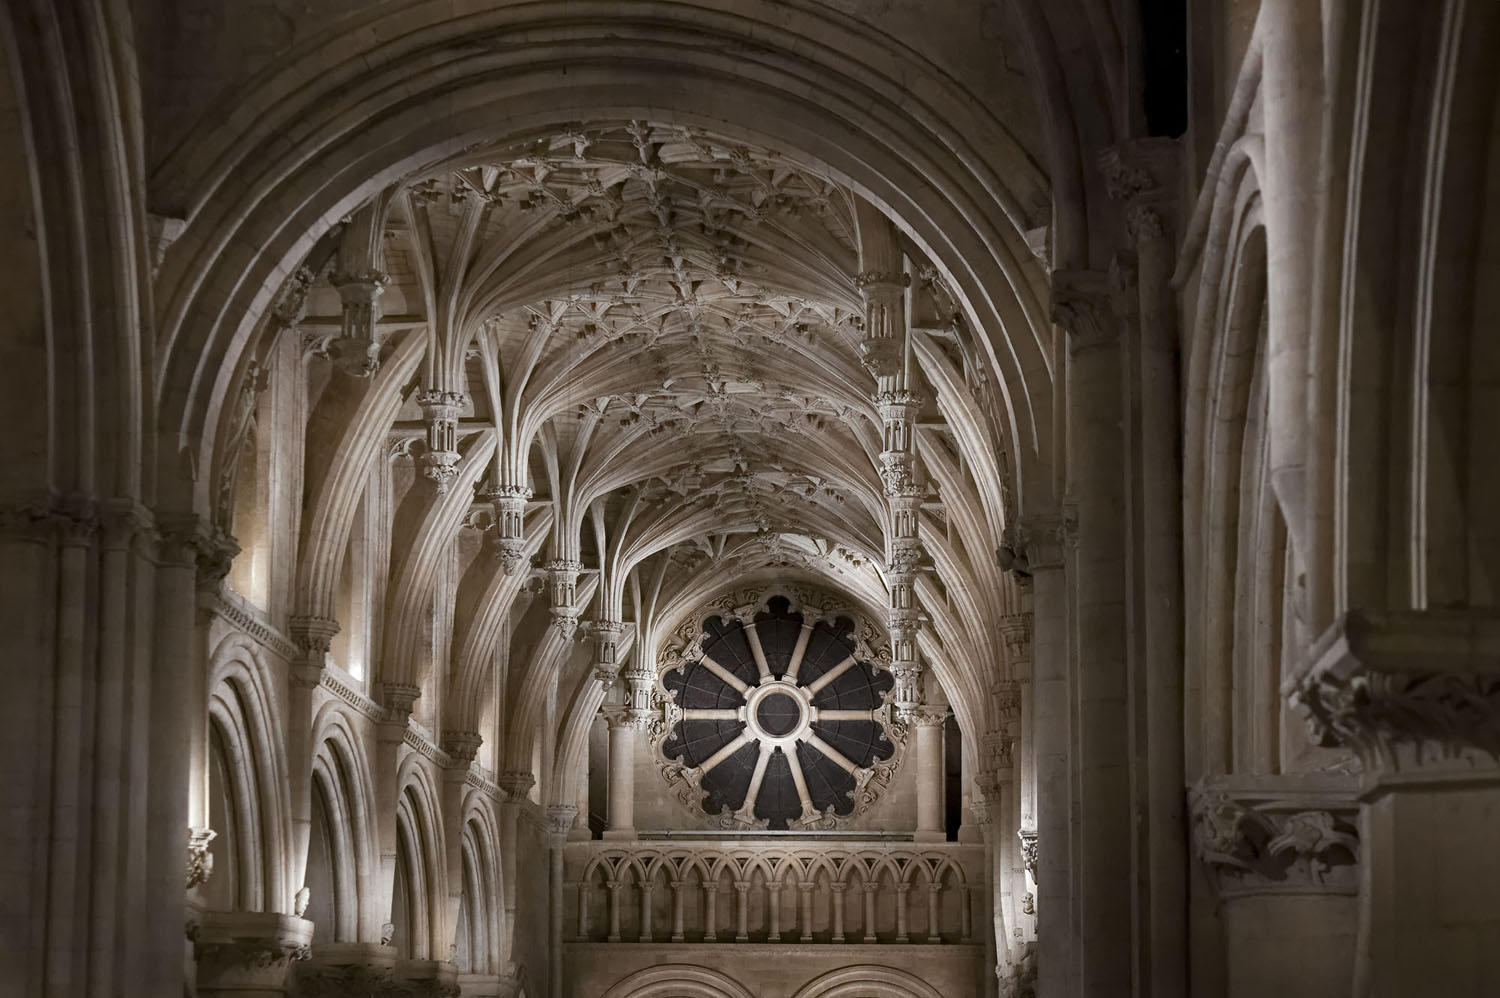 Christ Church Cathedral, Oxford, UK